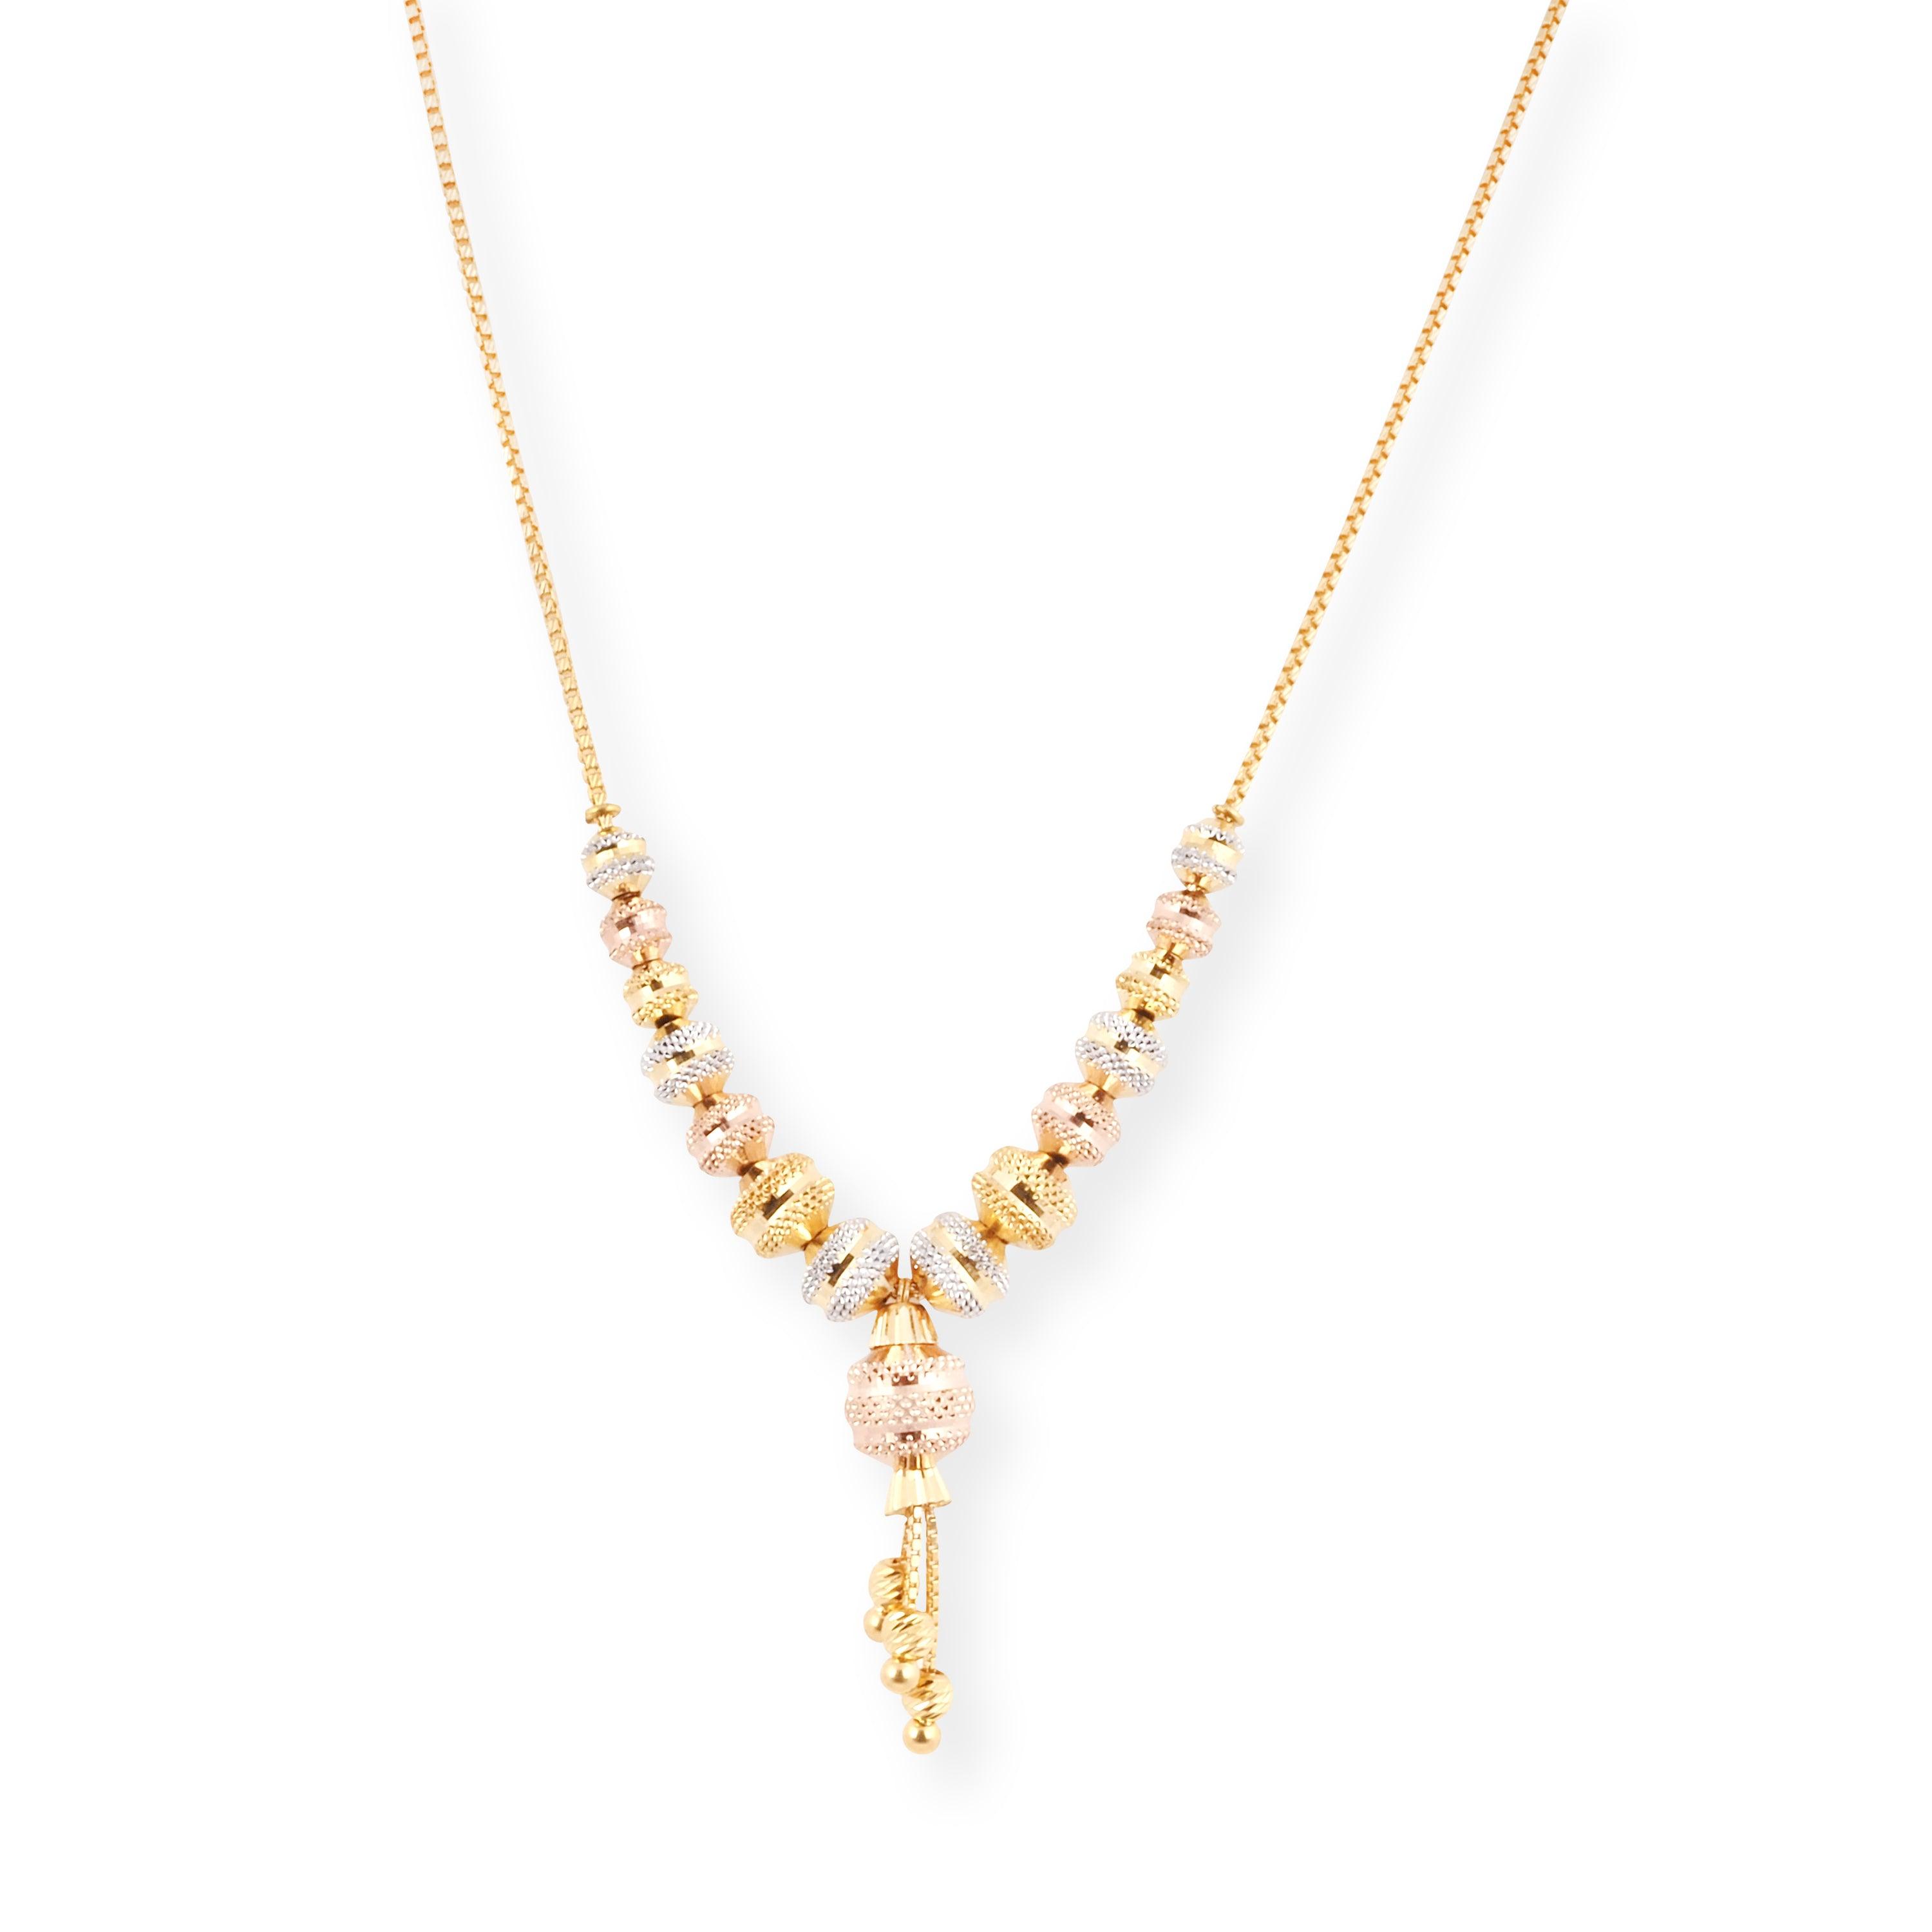 22ct Yellow Gold Necklace with Rose Gold & Rhodium Plating & Lobster Clasp N-7947 - Minar Jewellers